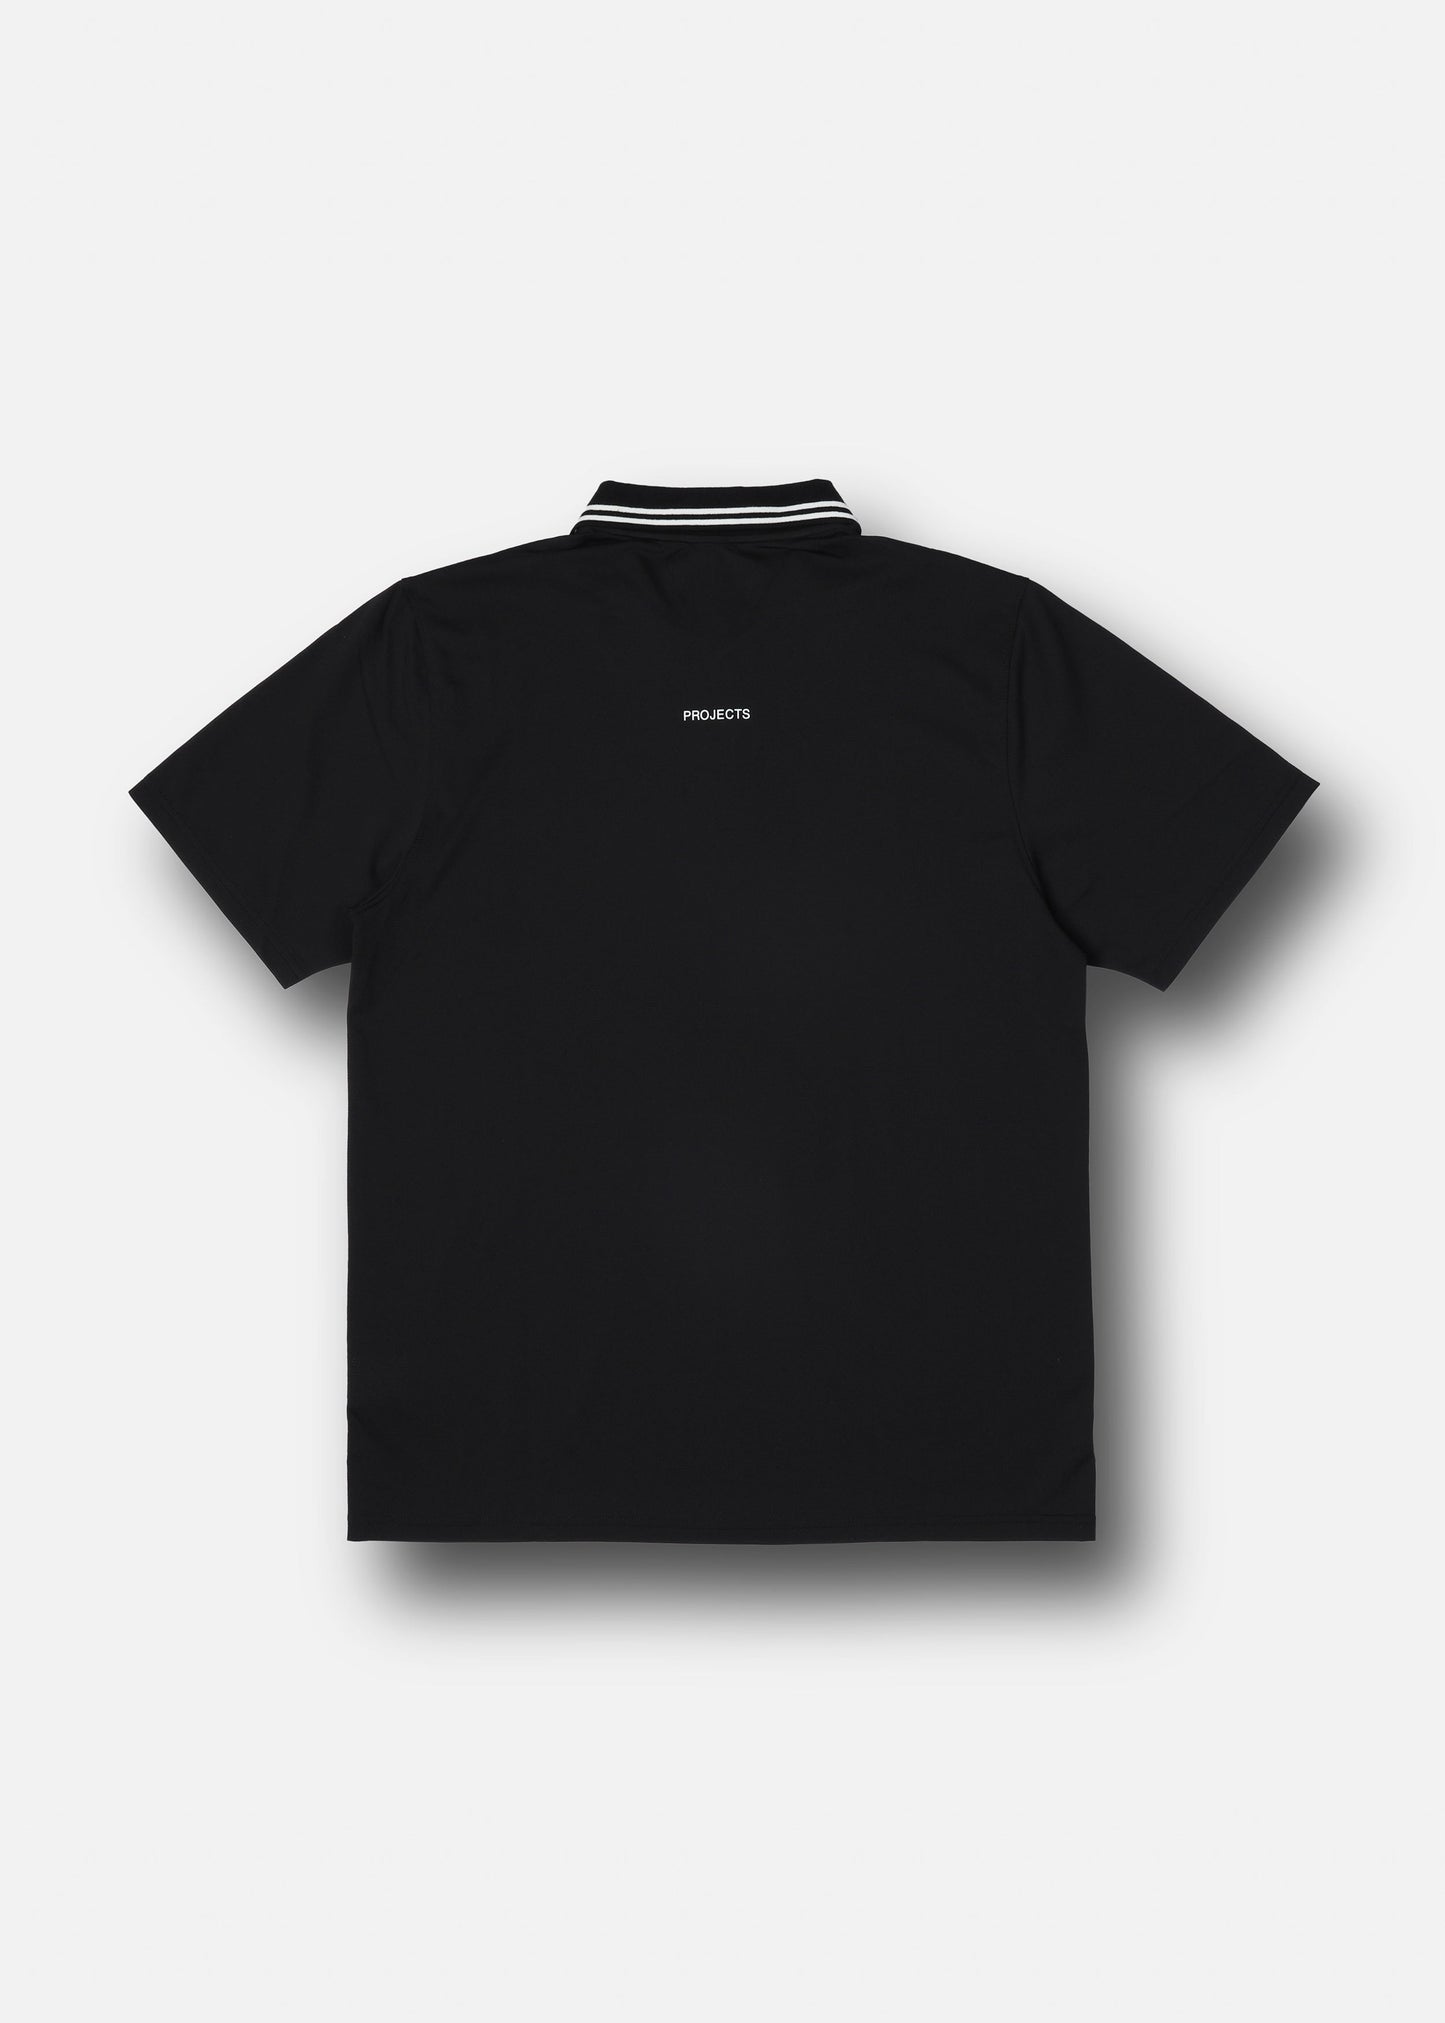 HANDS DOWN SS POLO : BLACK